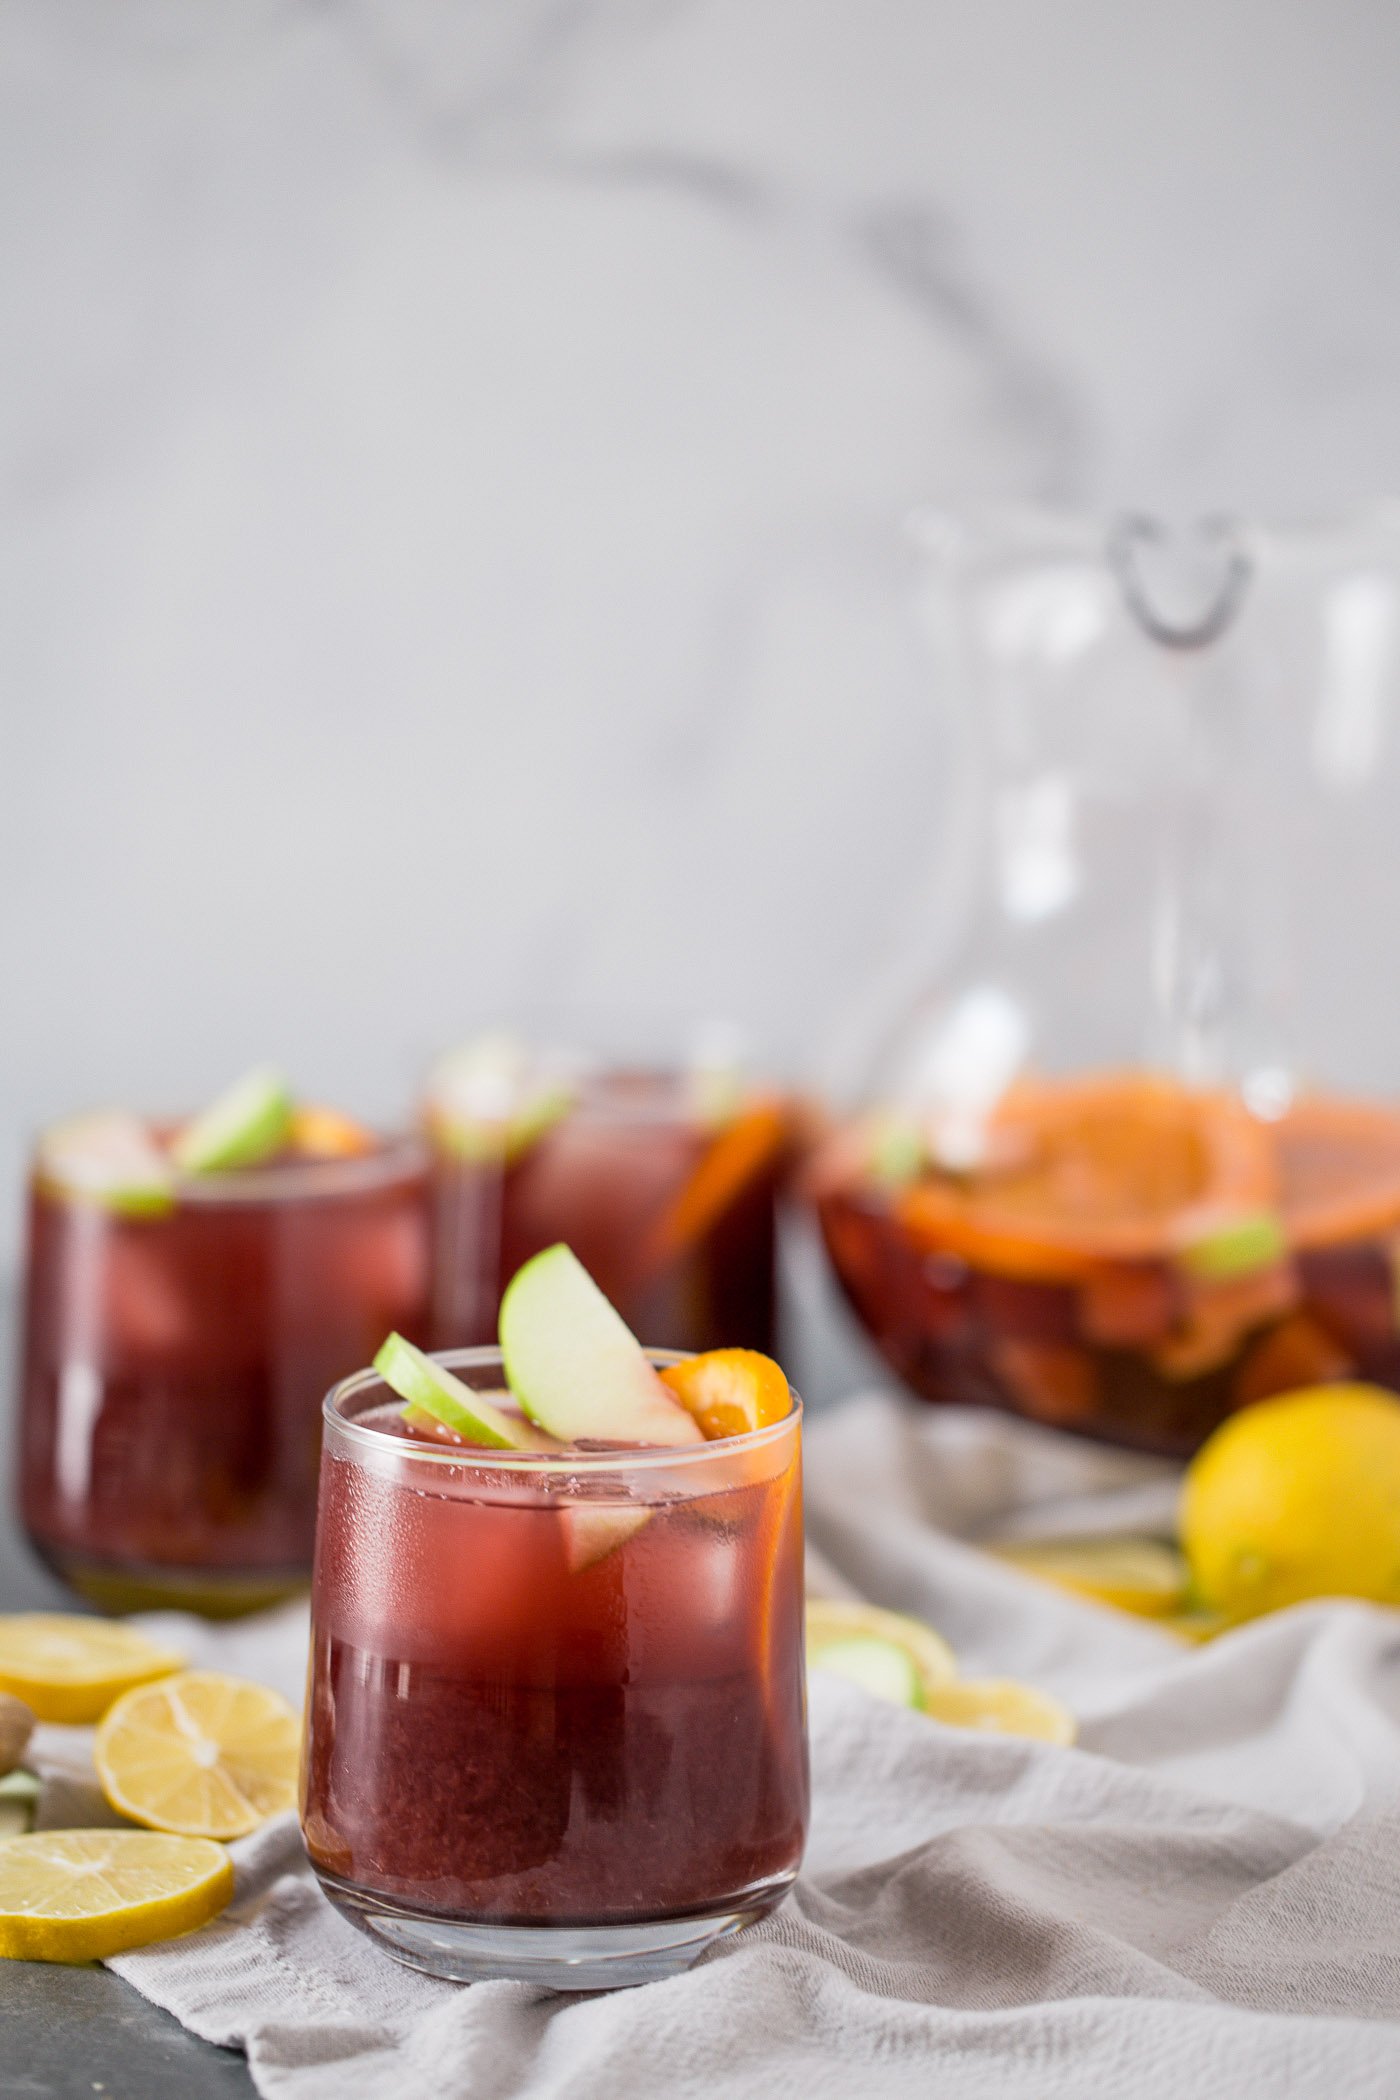 this two buck chuck sangria is an easy & inexpensive red wine sangria recipe featuring trader joe’s famous charles shaw wine. make two buck chuck sangria one pitcher at a time - the perfect drink to serve at girls night, holiday parties, dinner parties, & more! #playswellwithbutter #sangria #drinkrecipe #twobuckchuck #traderjoes #traderjoesrecipe